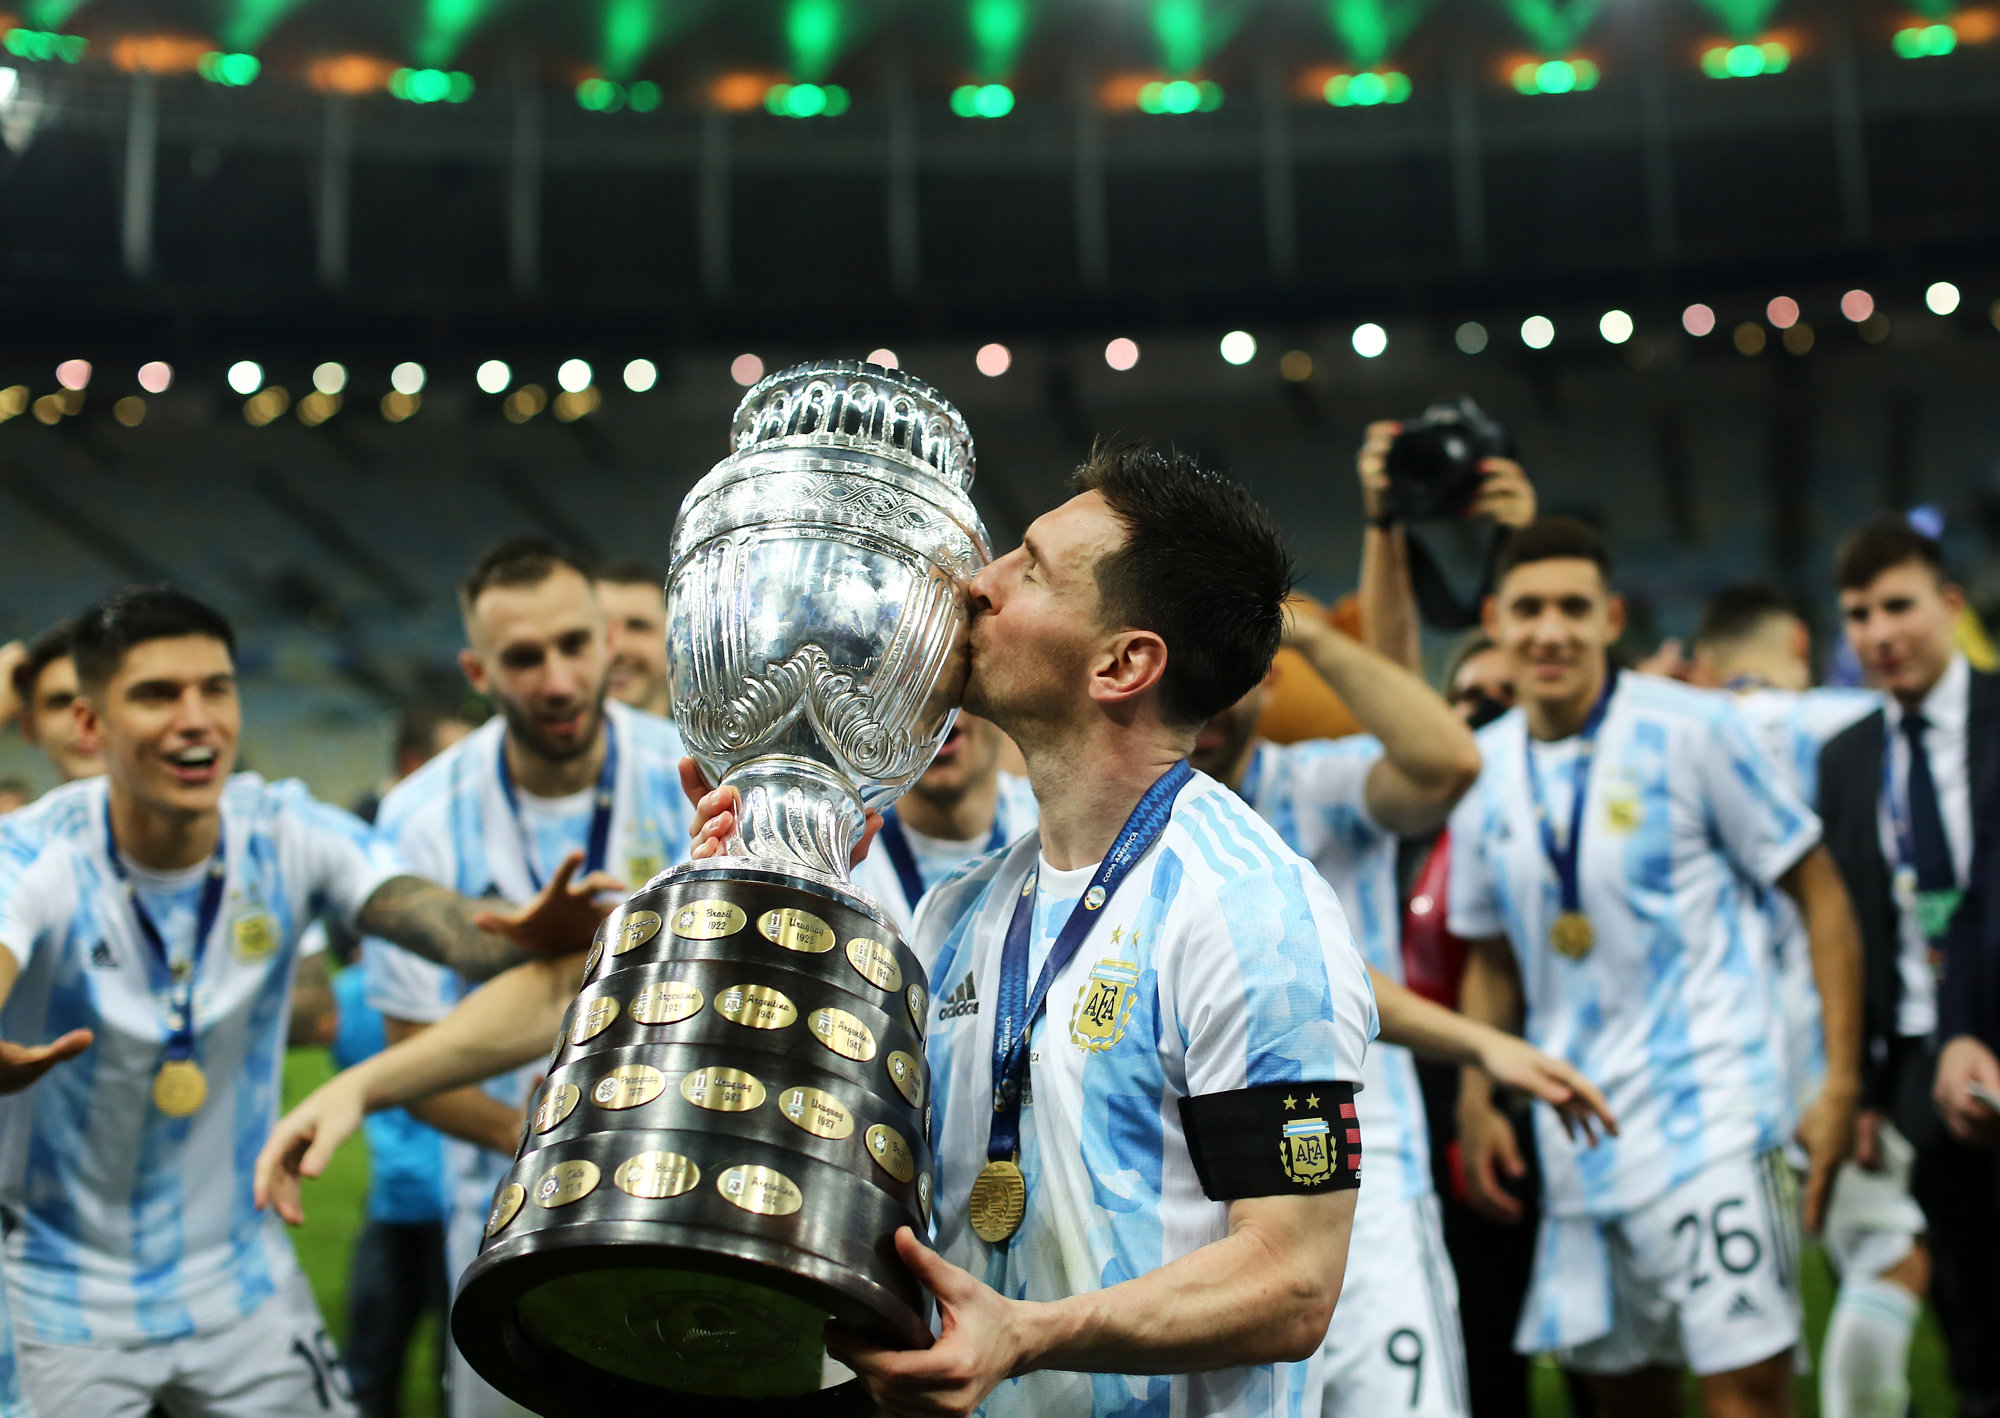 Finalissima 2022 Where And How To Watch Lionel Messi's Argentina vs Italy?